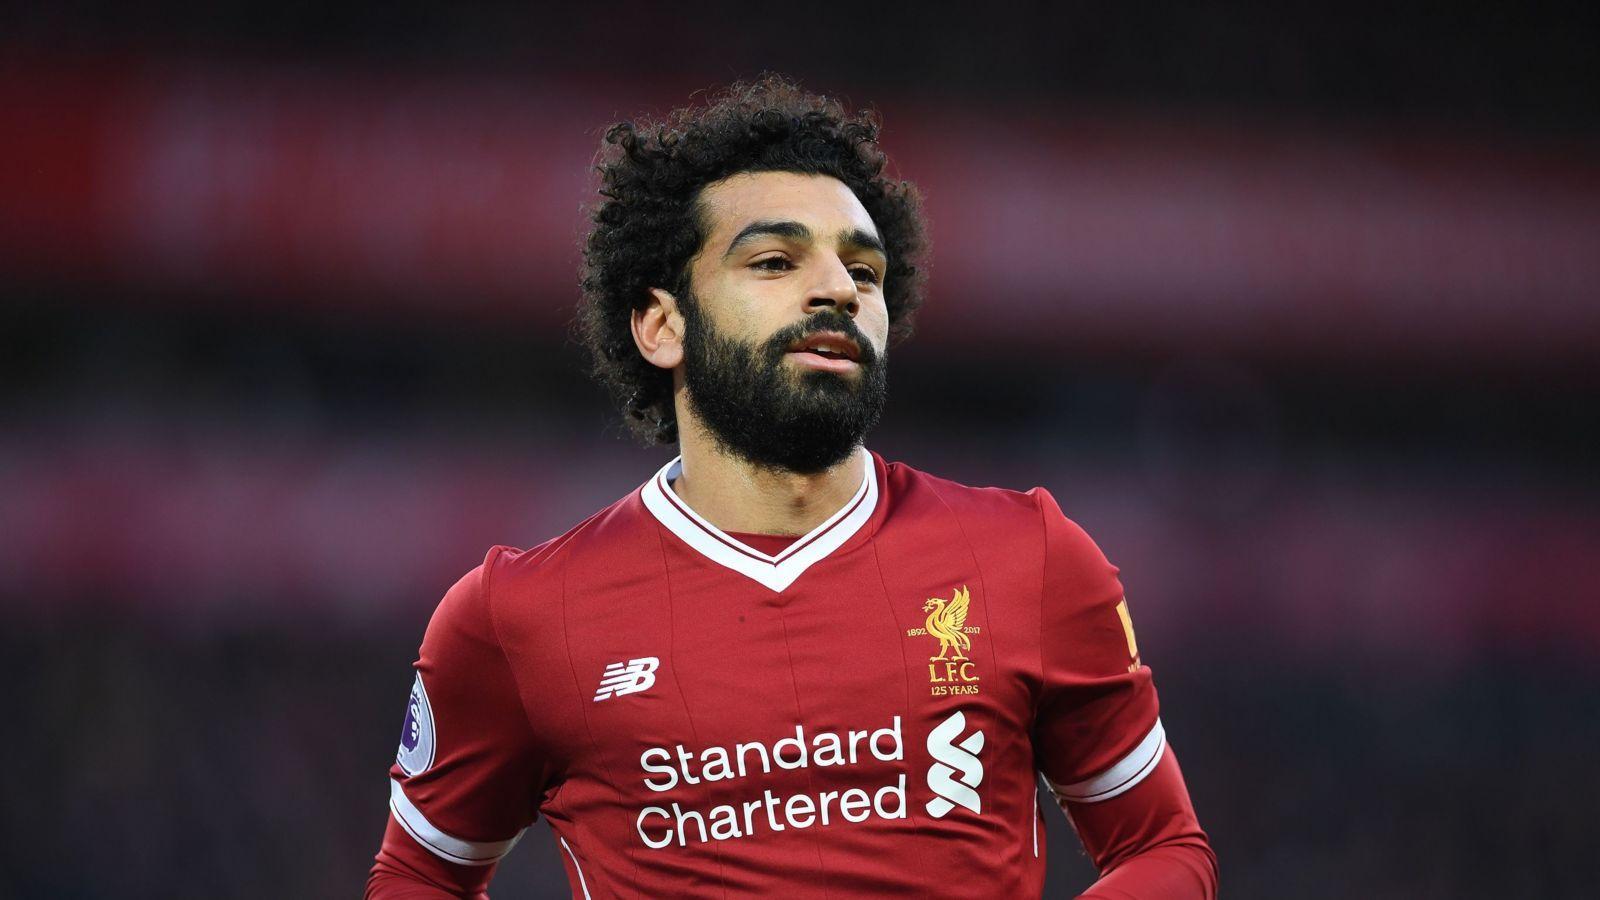 Chelsea need to pay close attention to Liverpool's Mohamed Salah